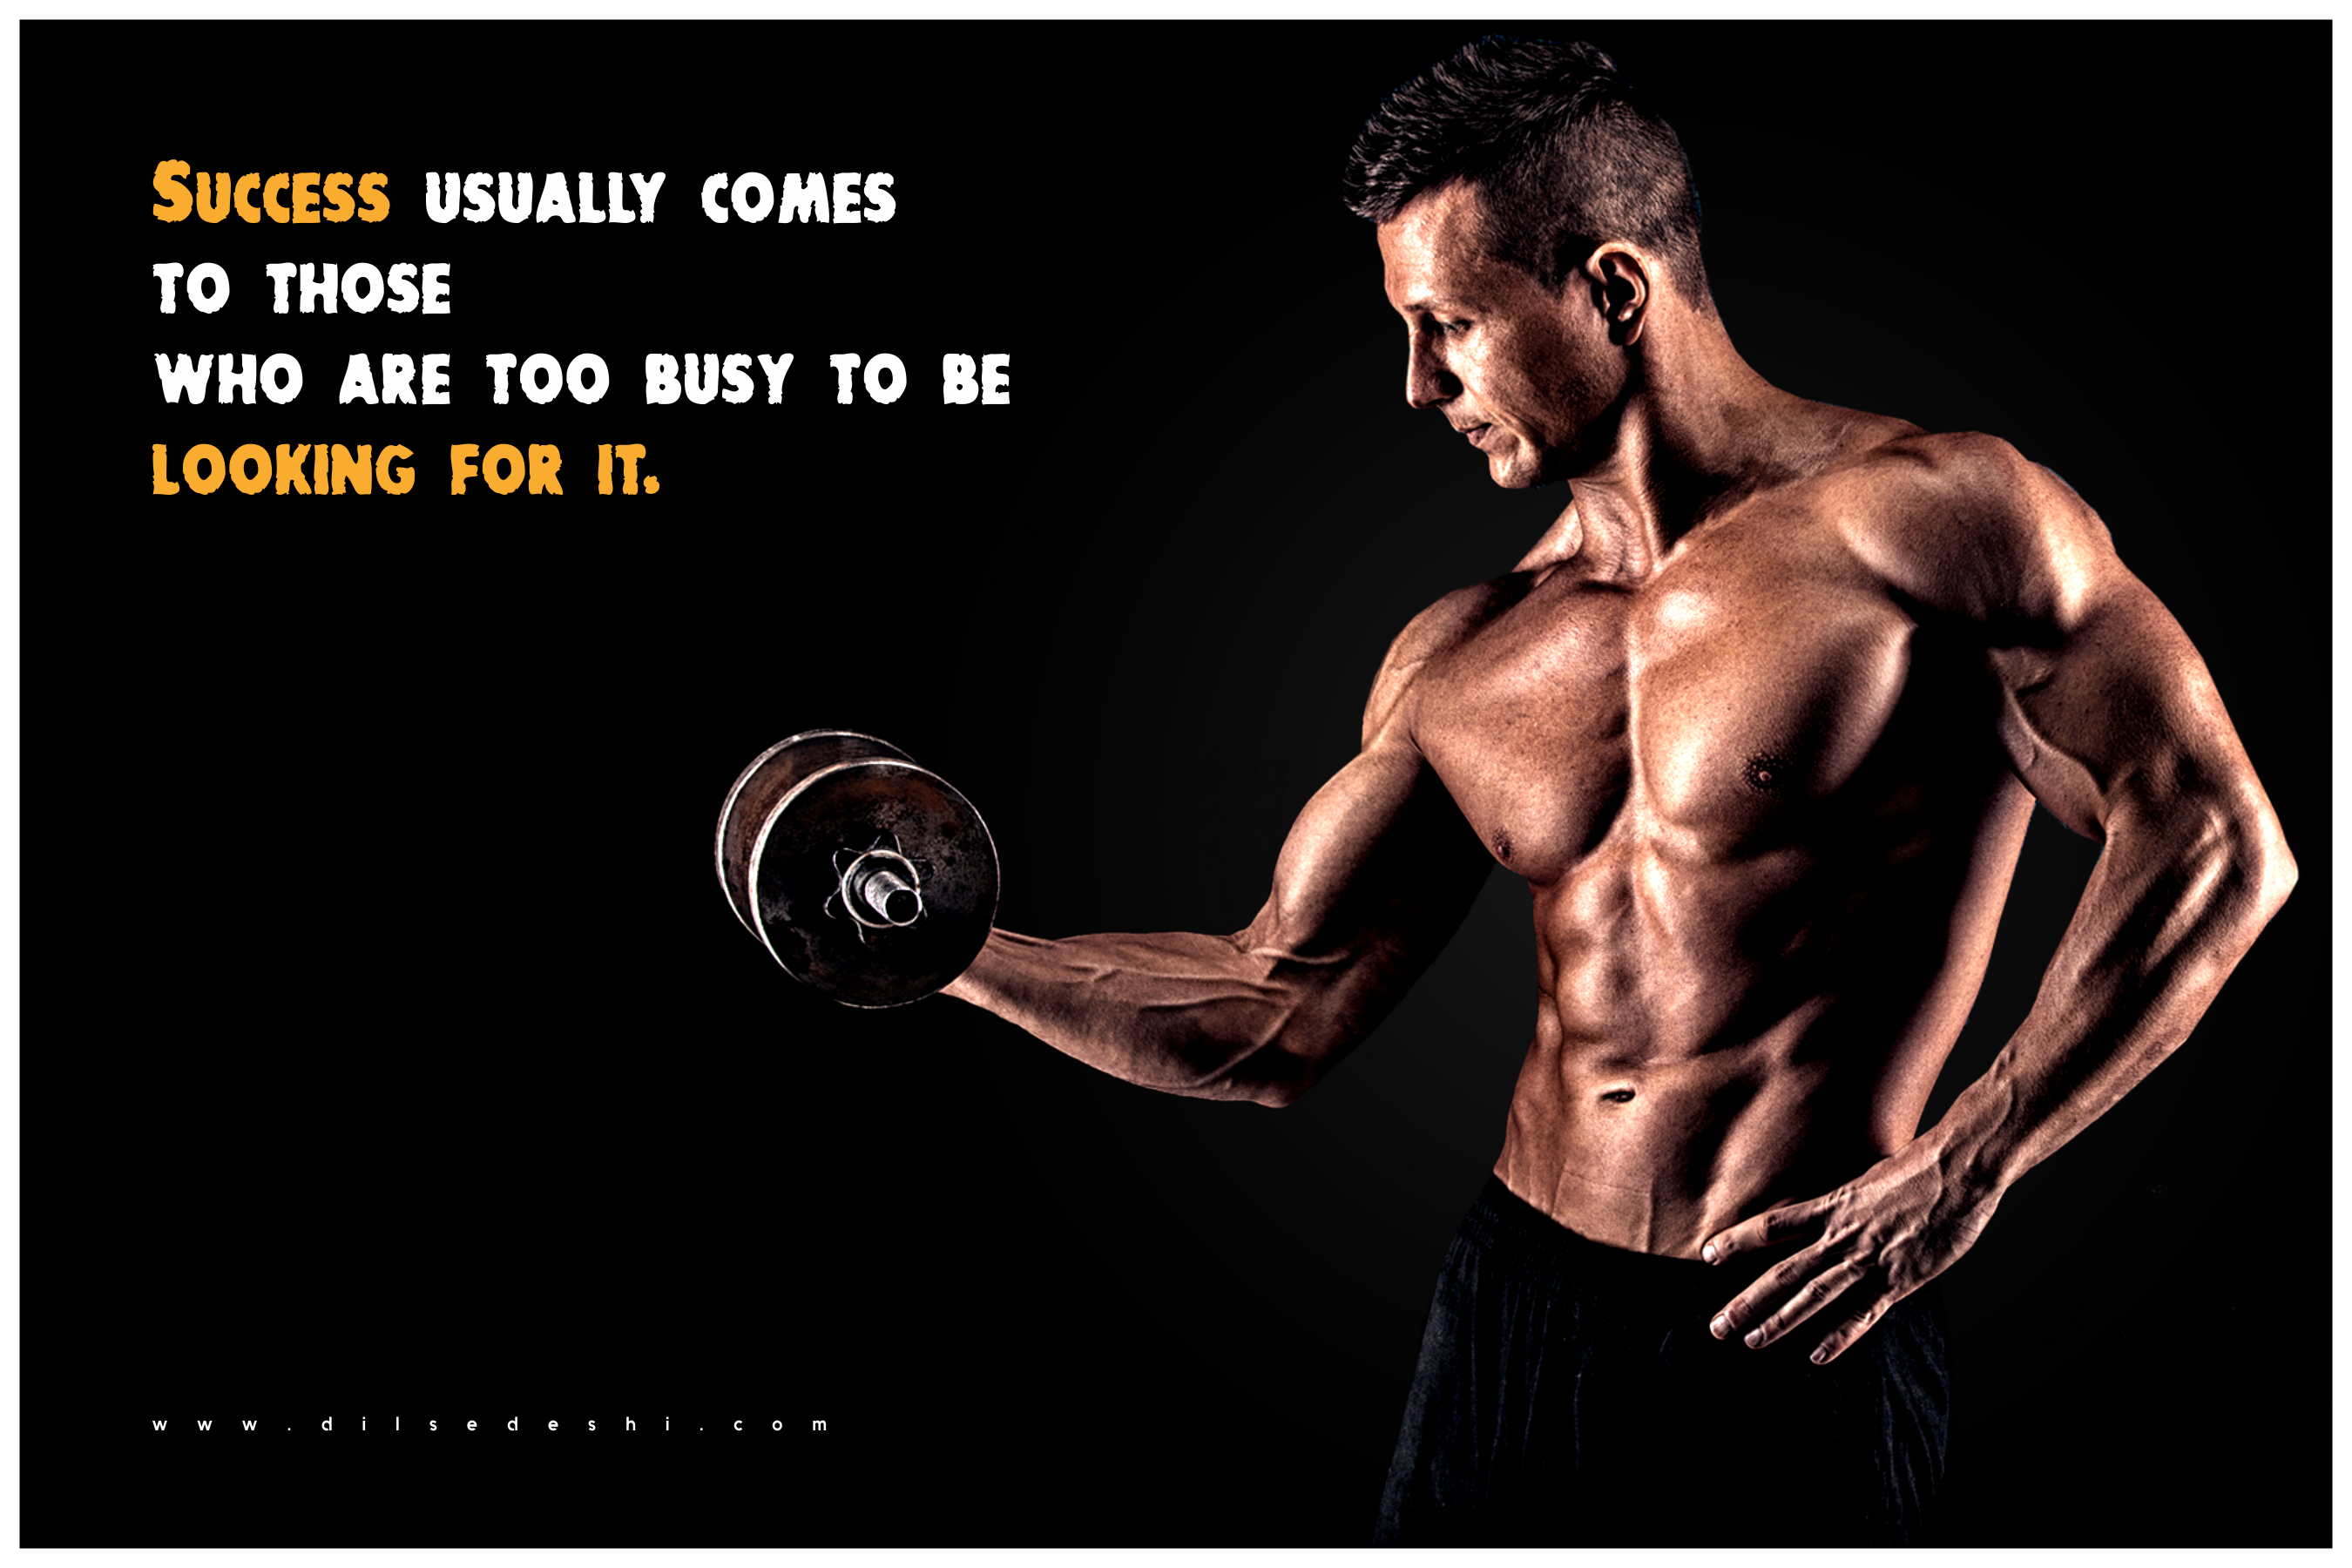 Gym Motivational Wall Poster Buy Online on DSDCart